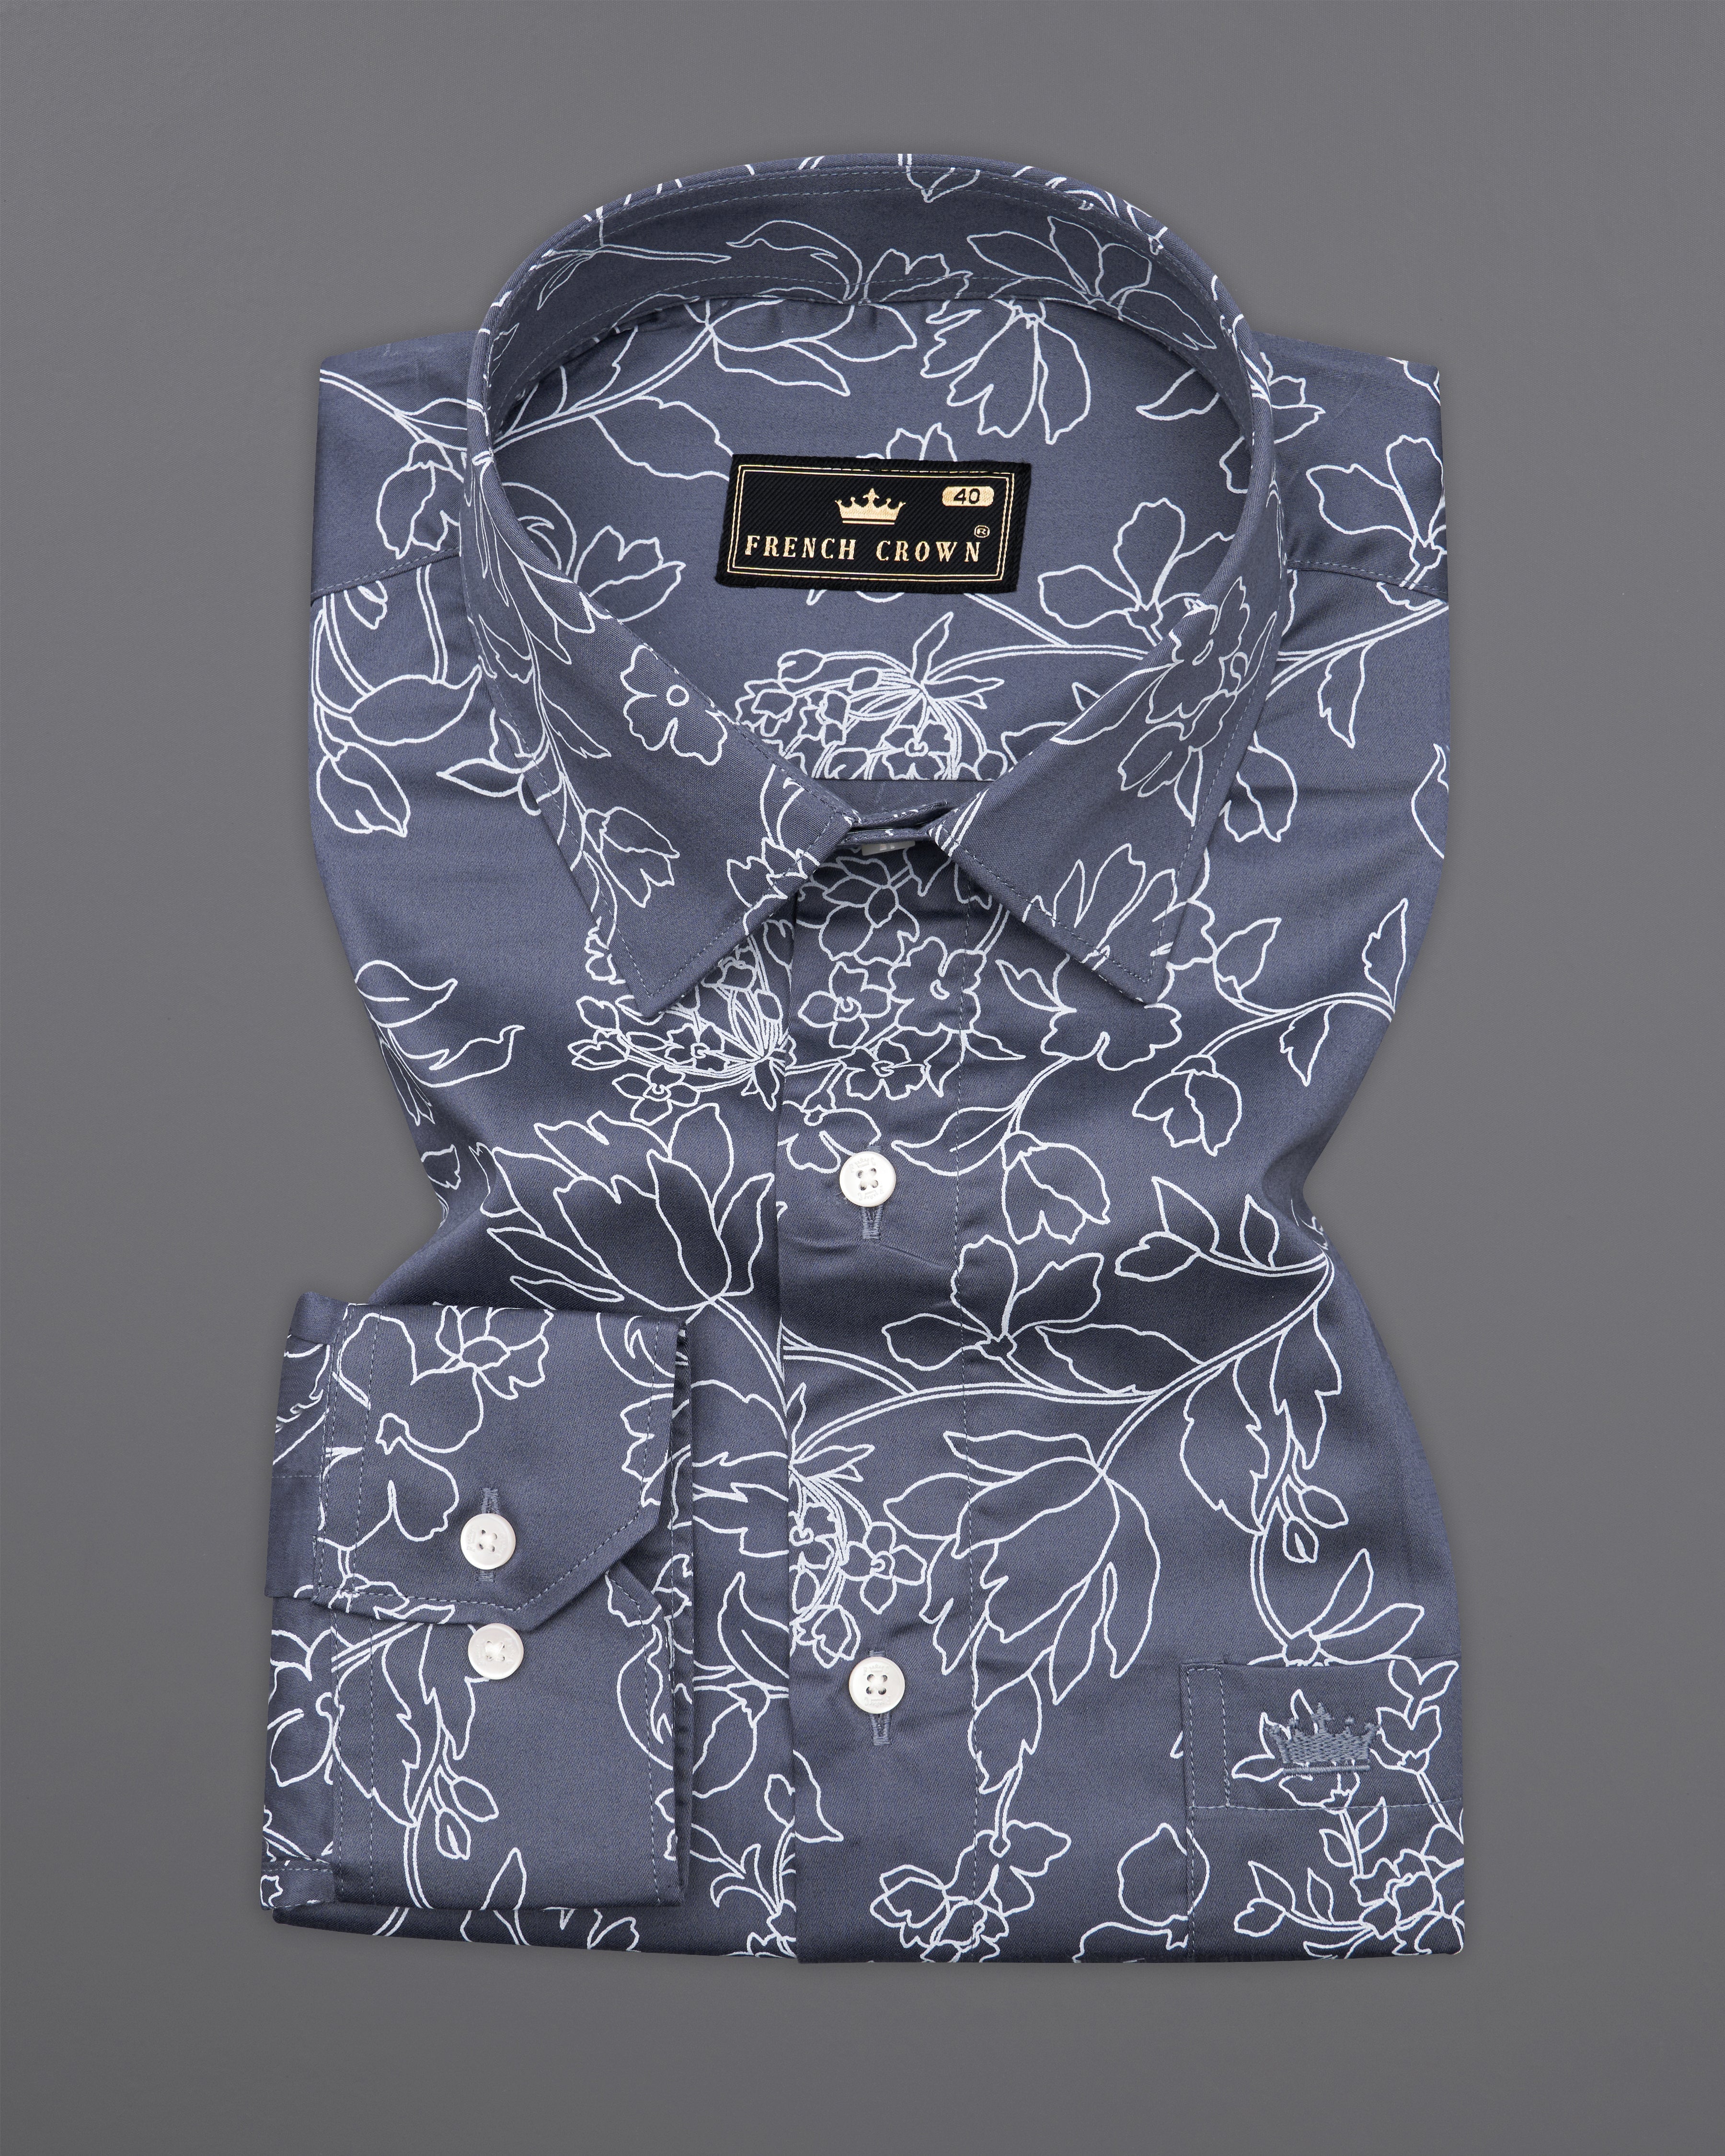 Mulled Wine Dark Gray and White Floral Printed Super Soft Premium Cotton Shirt 9952-38, 9952-H-38, 9952-39, 9952-H-39, 9952-40, 9952-H-40, 9952-42, 9952-H-42, 9952-44, 9952-H-44, 9952-46, 9952-H-46, 9952-48, 9952-H-48, 9952-50, 9952-H-50, 9952-52, 9952-H-52